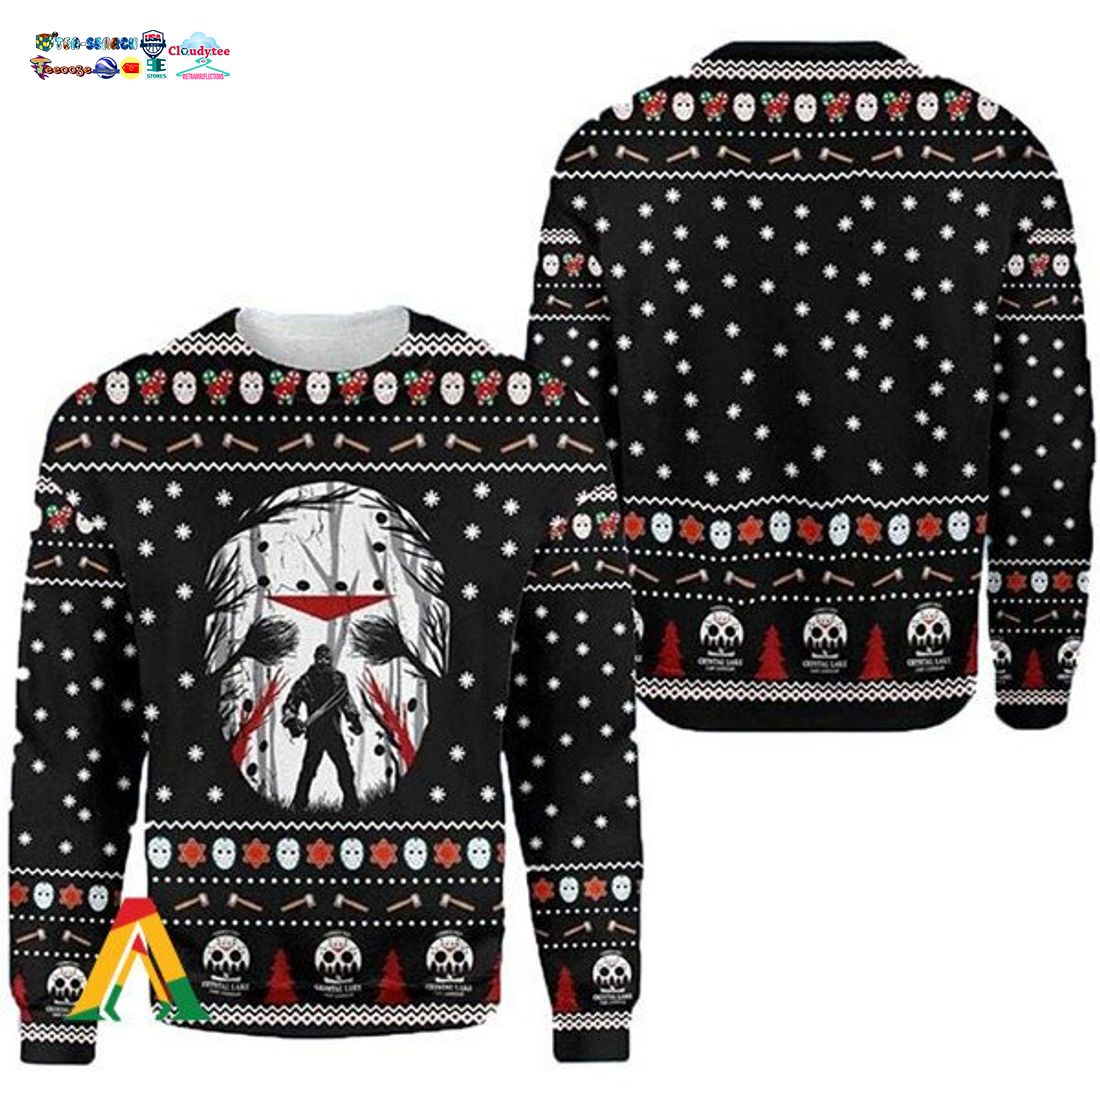 Jason Voorhees Friday The 13th Ugly Christmas Sweater - Good click